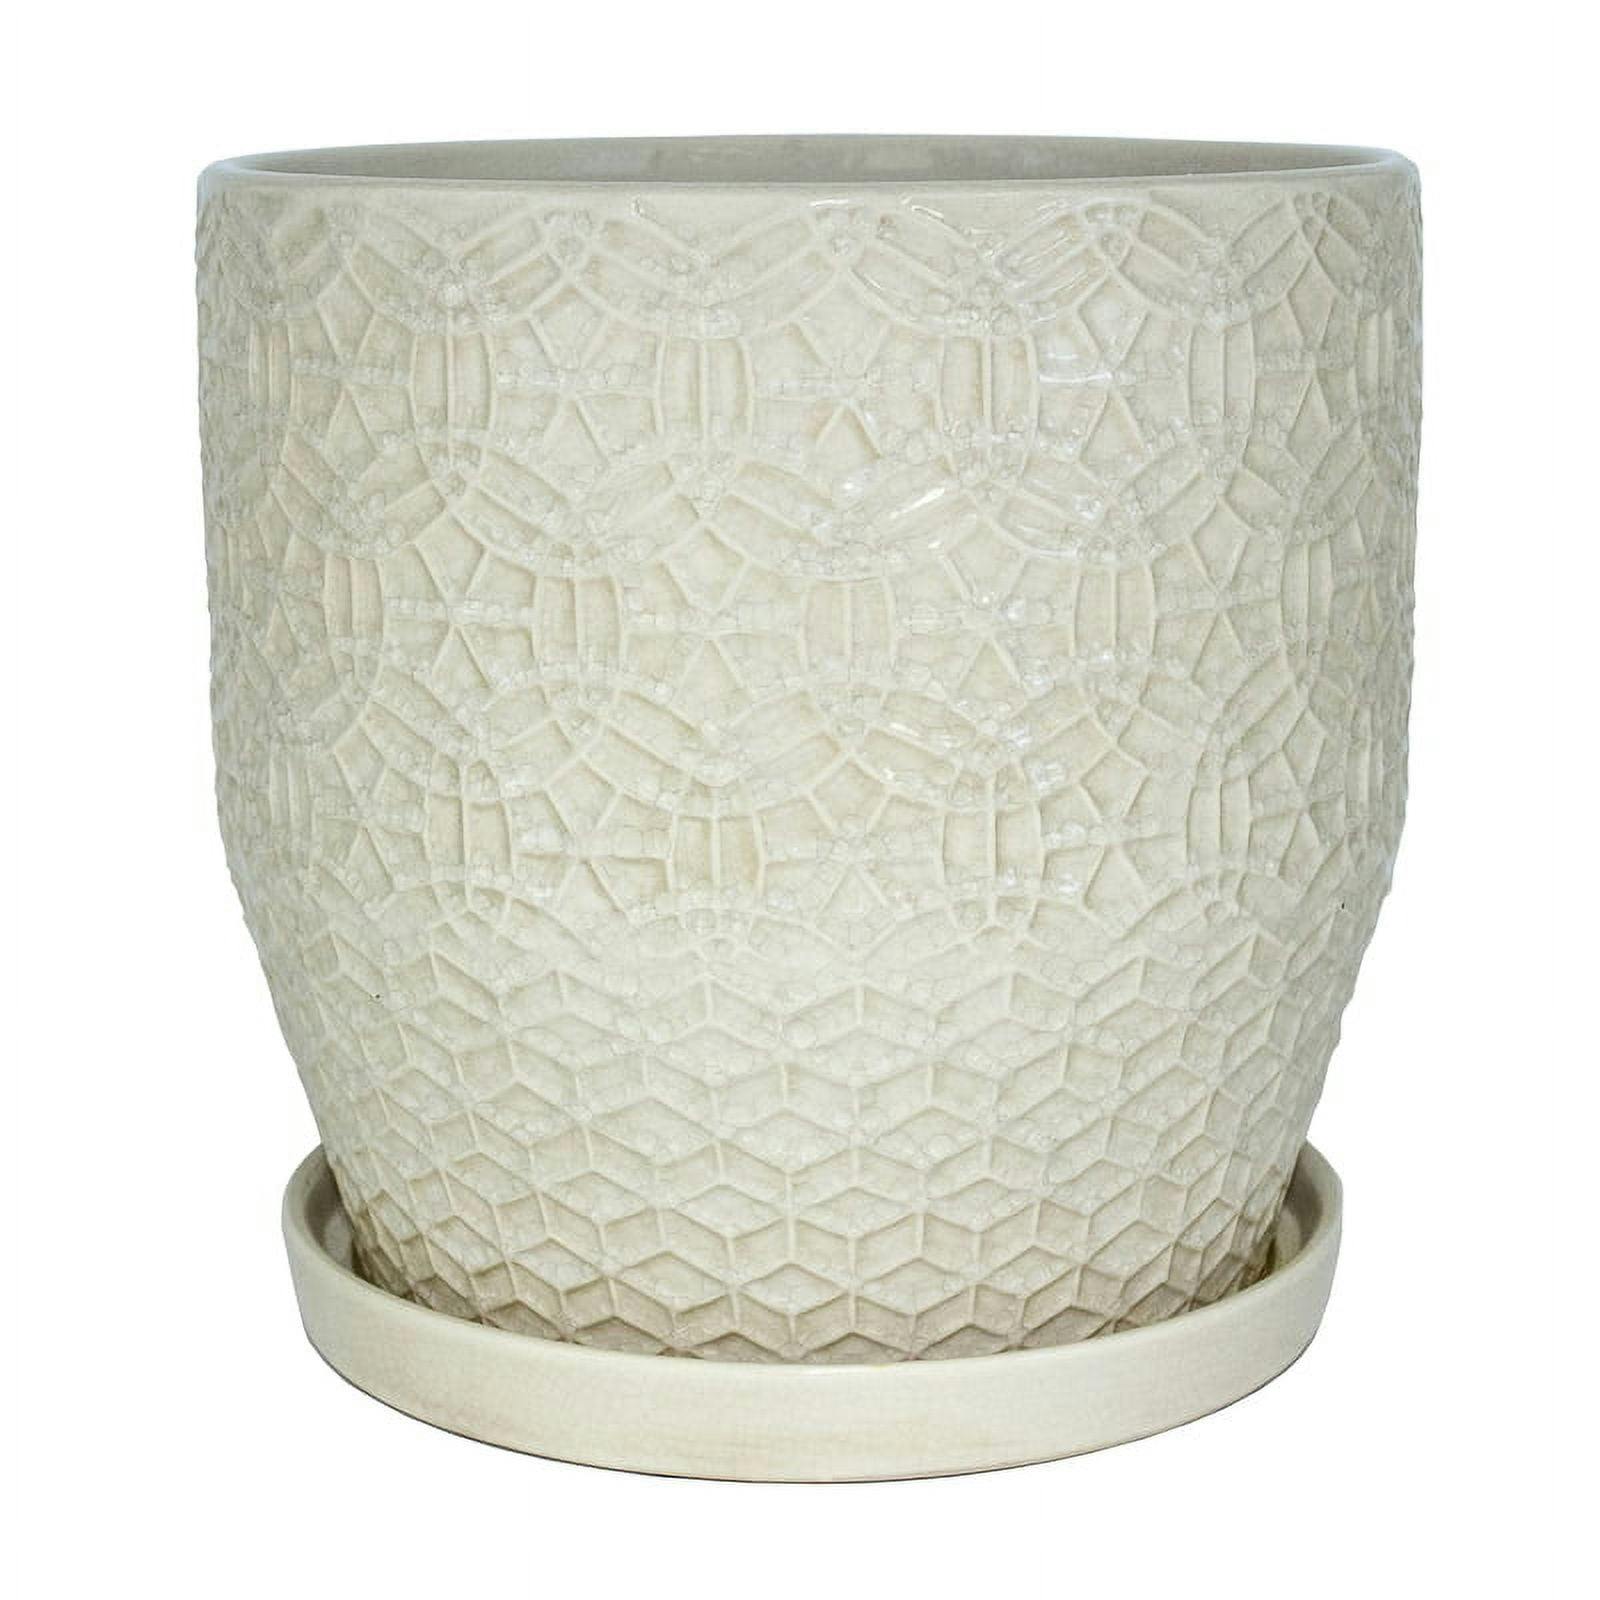 Rivage 12" Ivory White Ceramic Crackle Round Planter with Saucer